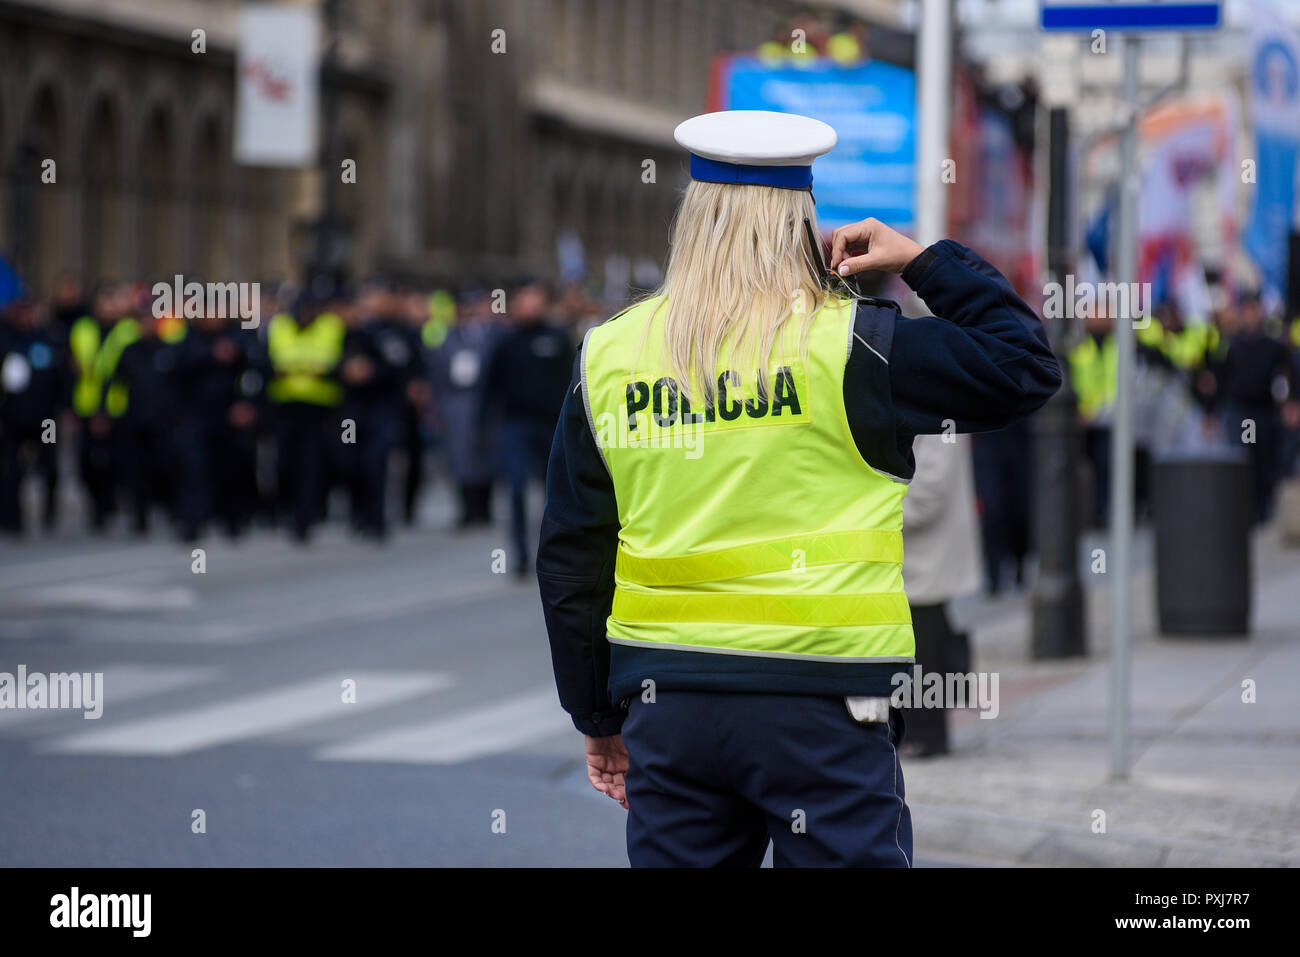 Police woman standing on the cross road and controlling the traffic. Dressed in a police uniform with yellow west. Stock Photo